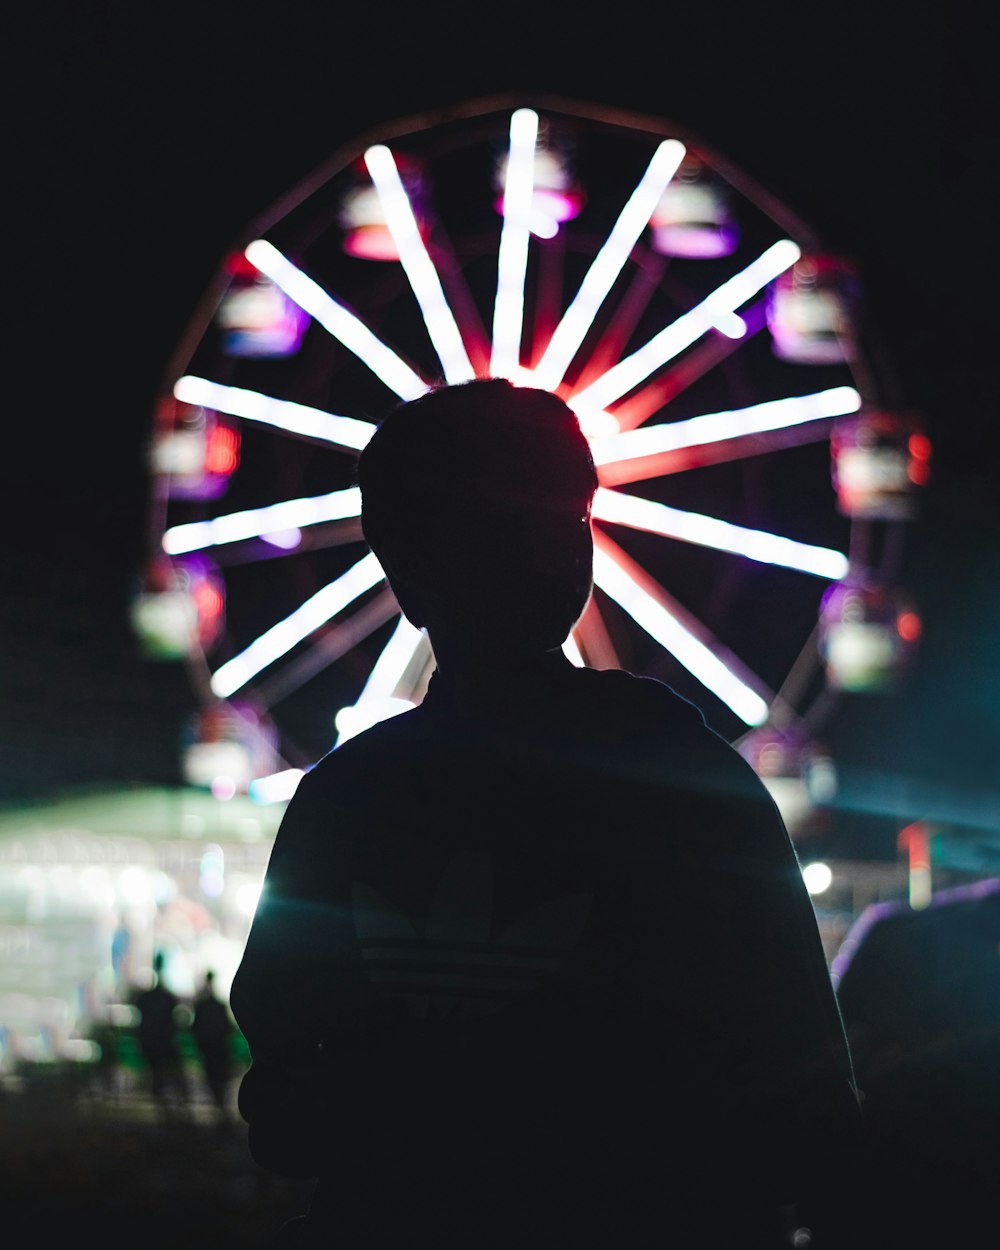 man in black shirt standing in front of lighted ferris wheel